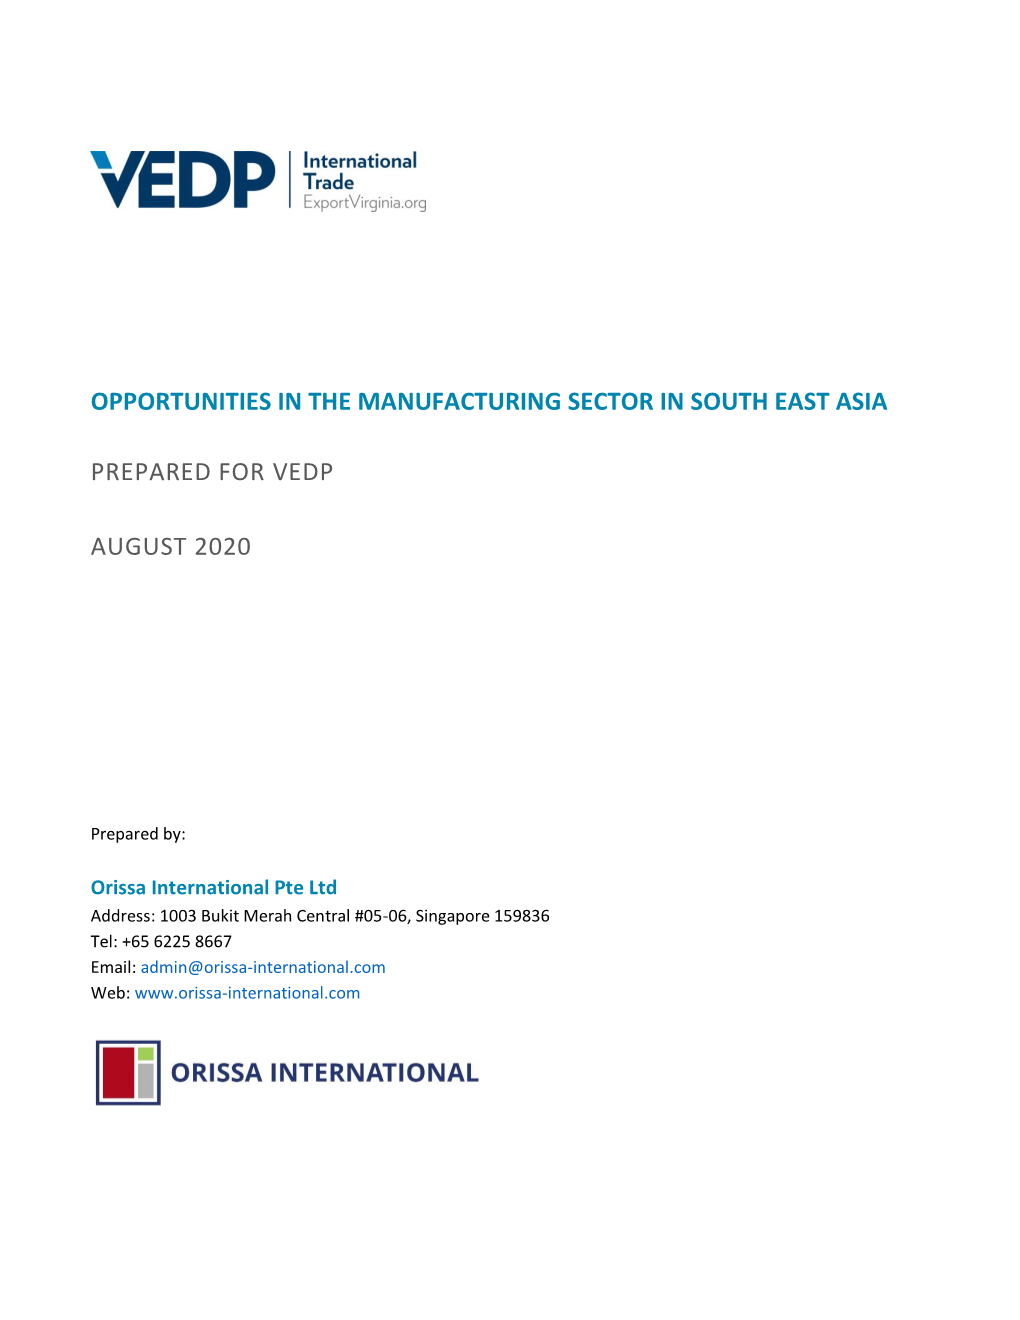 Manufacturing in South East Asia